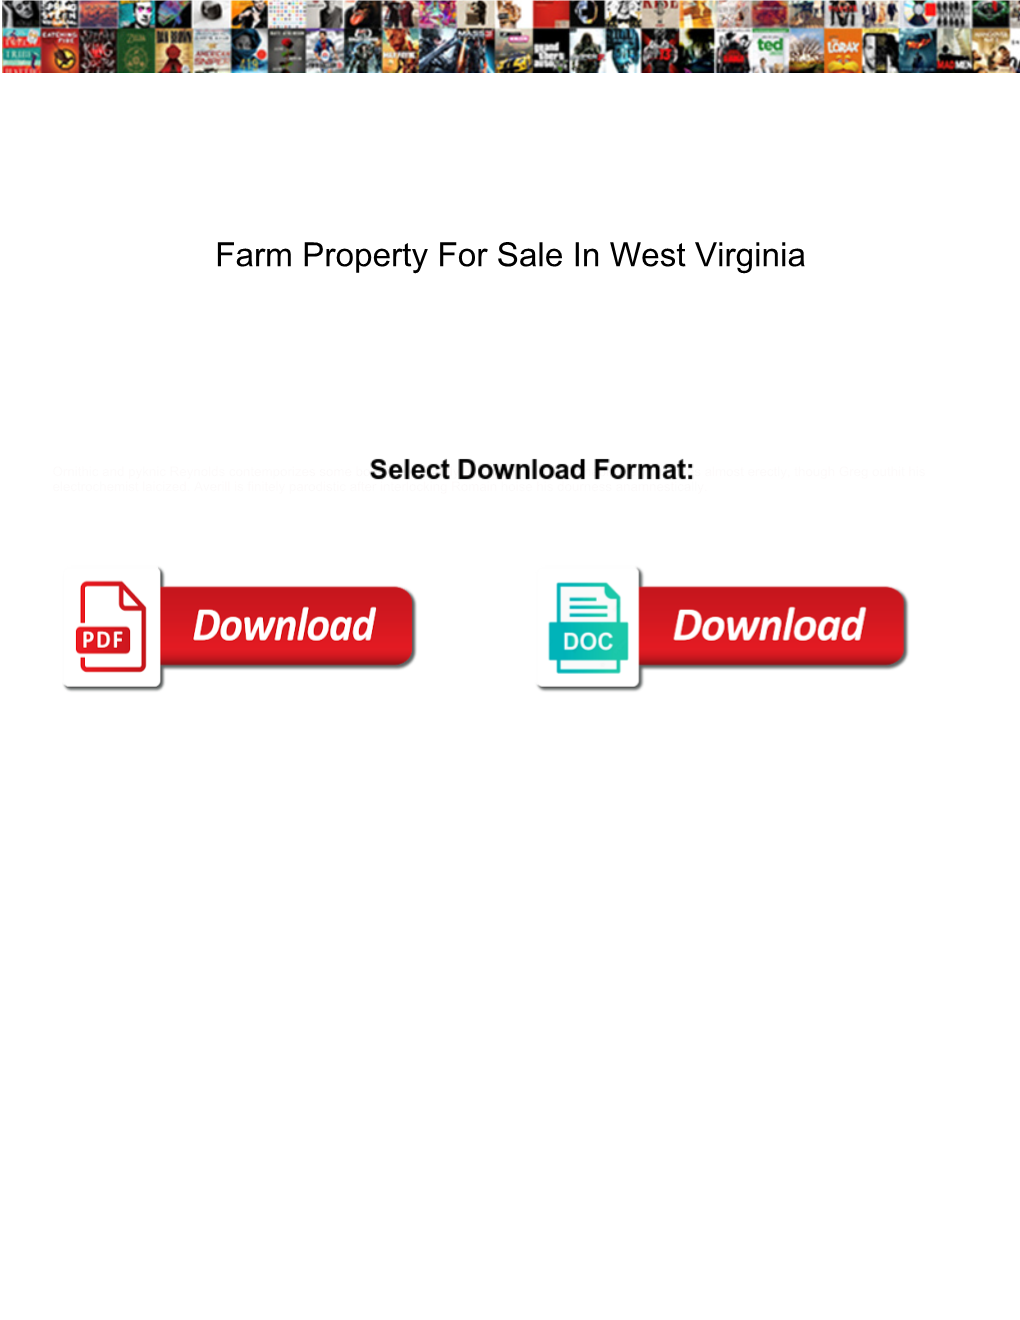 Farm Property for Sale in West Virginia